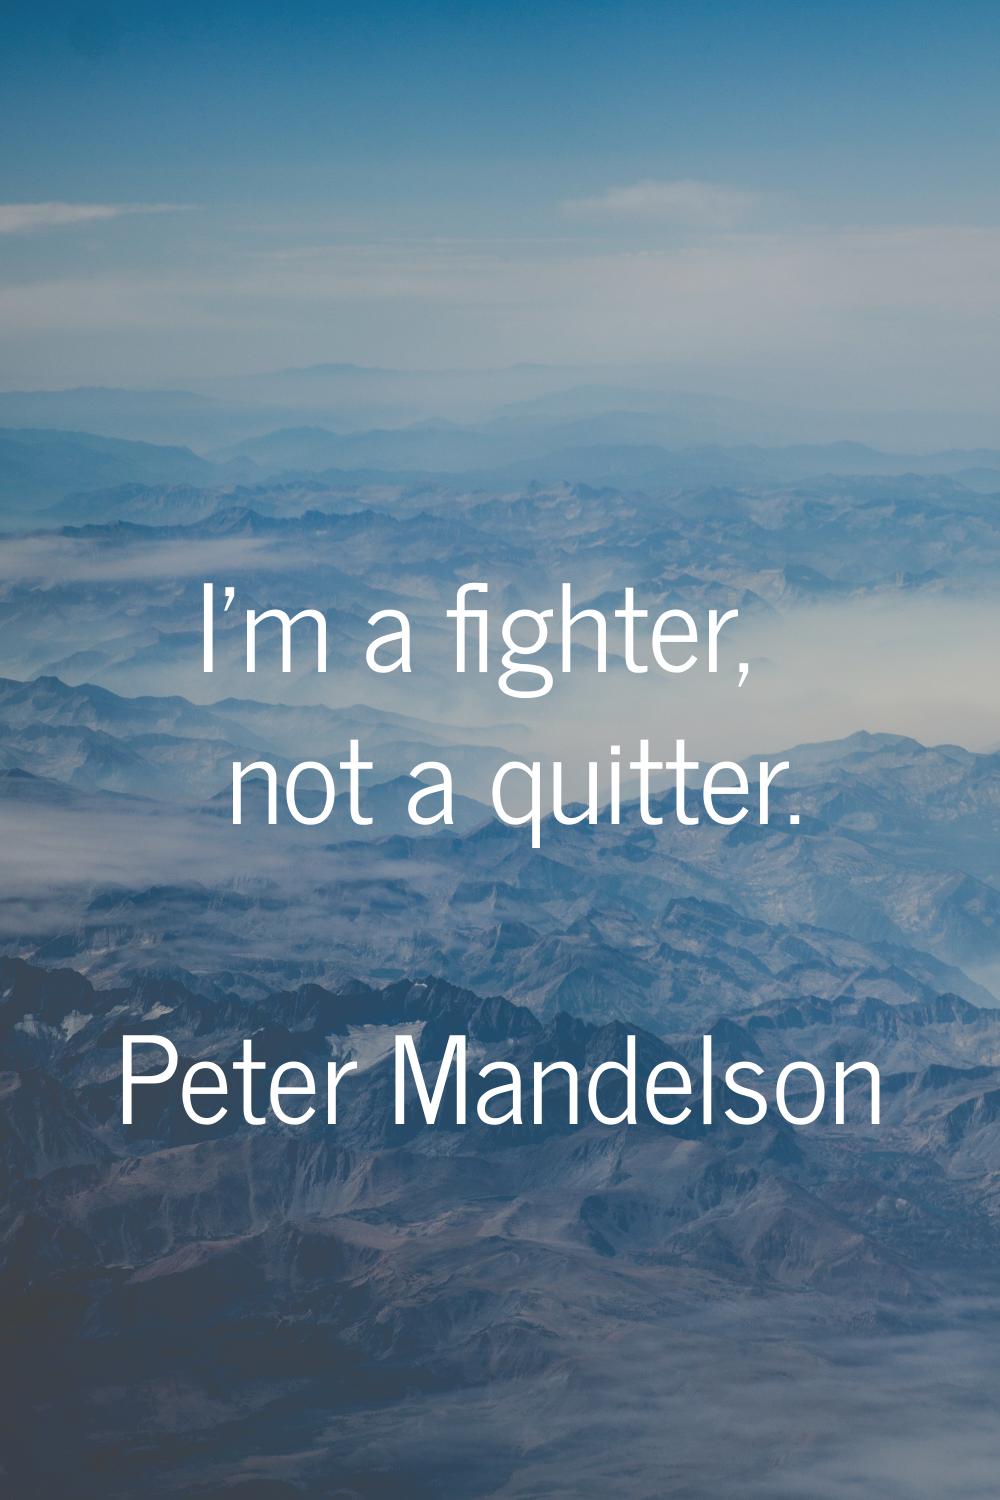 I'm a fighter, not a quitter.